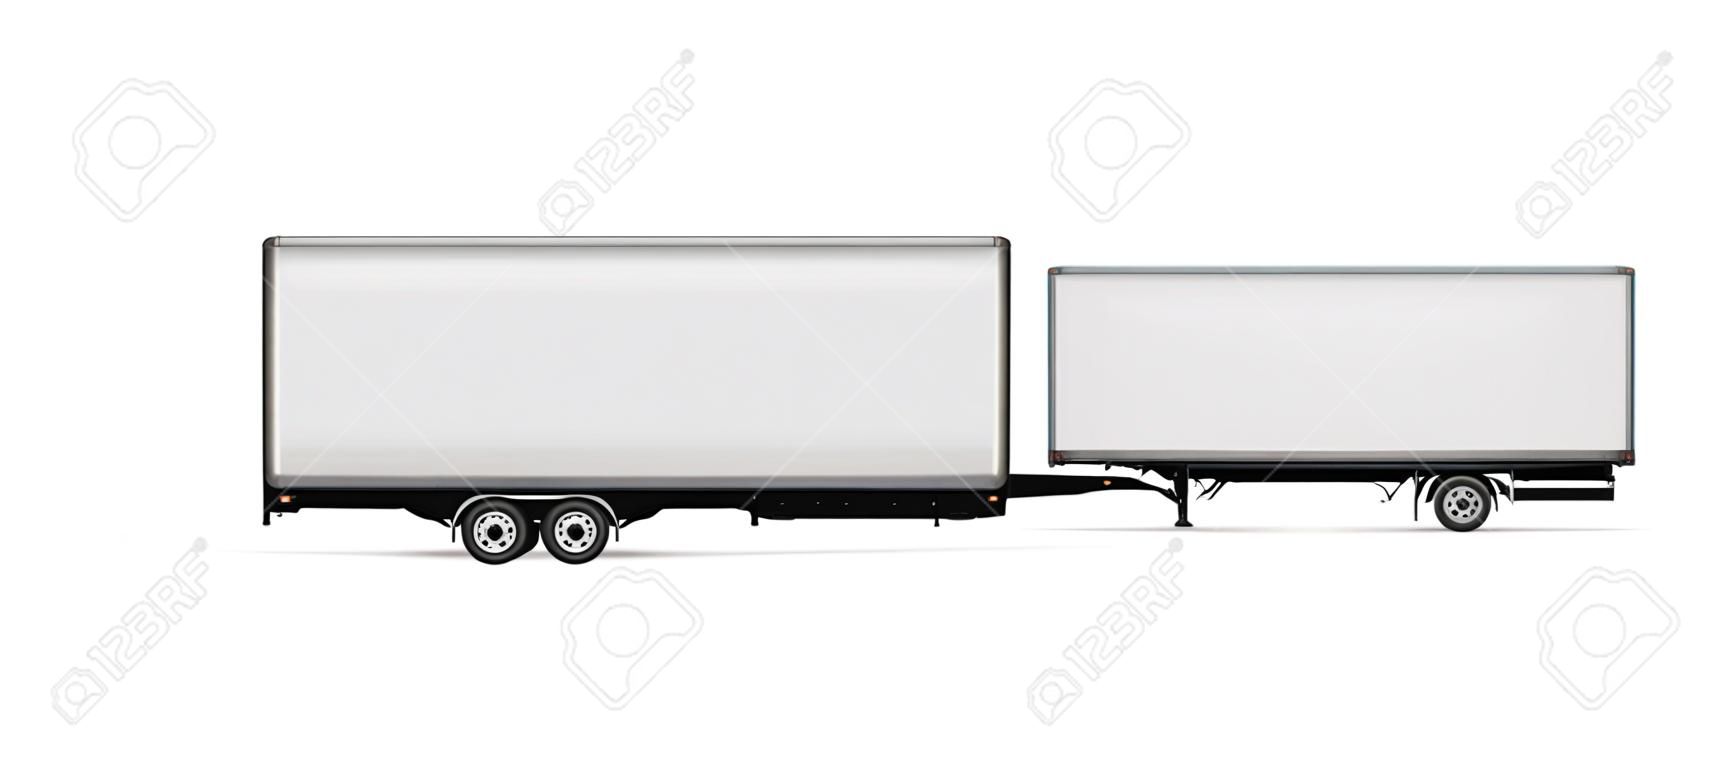 Semi-trailer truck vector template. Isolated lorry with trailer on white for vehicle branding, corporate identity.  All elements in the groups on separate layers for easy editing and recolor